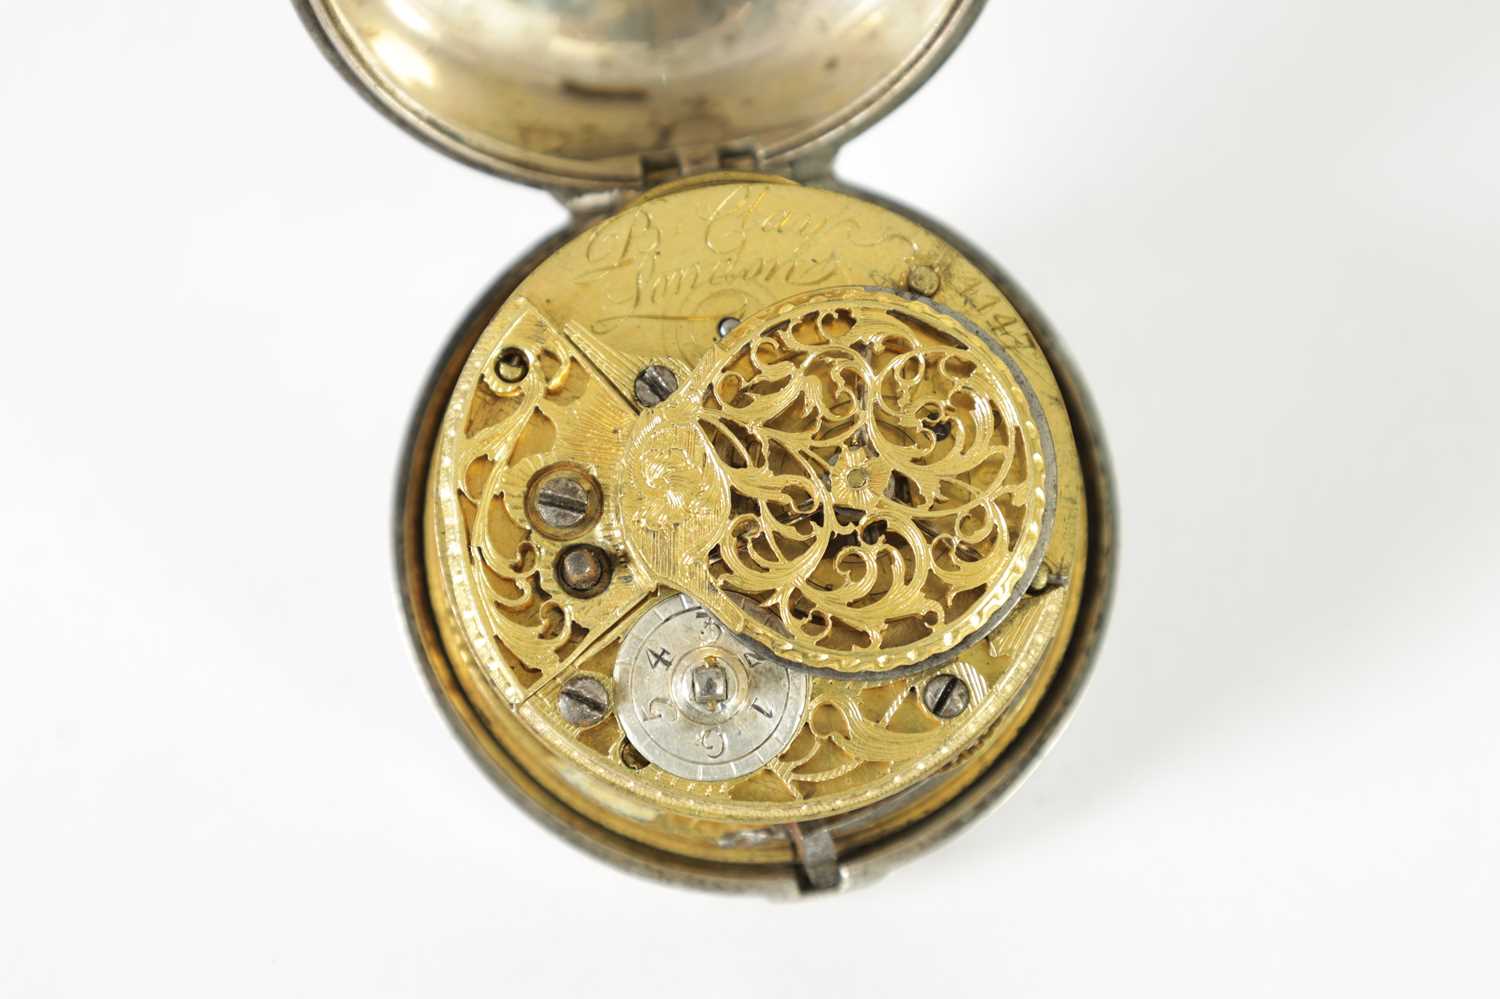 B. CLAY, LONDON. AN EARLY 18TH CENTURY SILVER PAIR CASE VERGE POCKET WATCH - Image 7 of 10